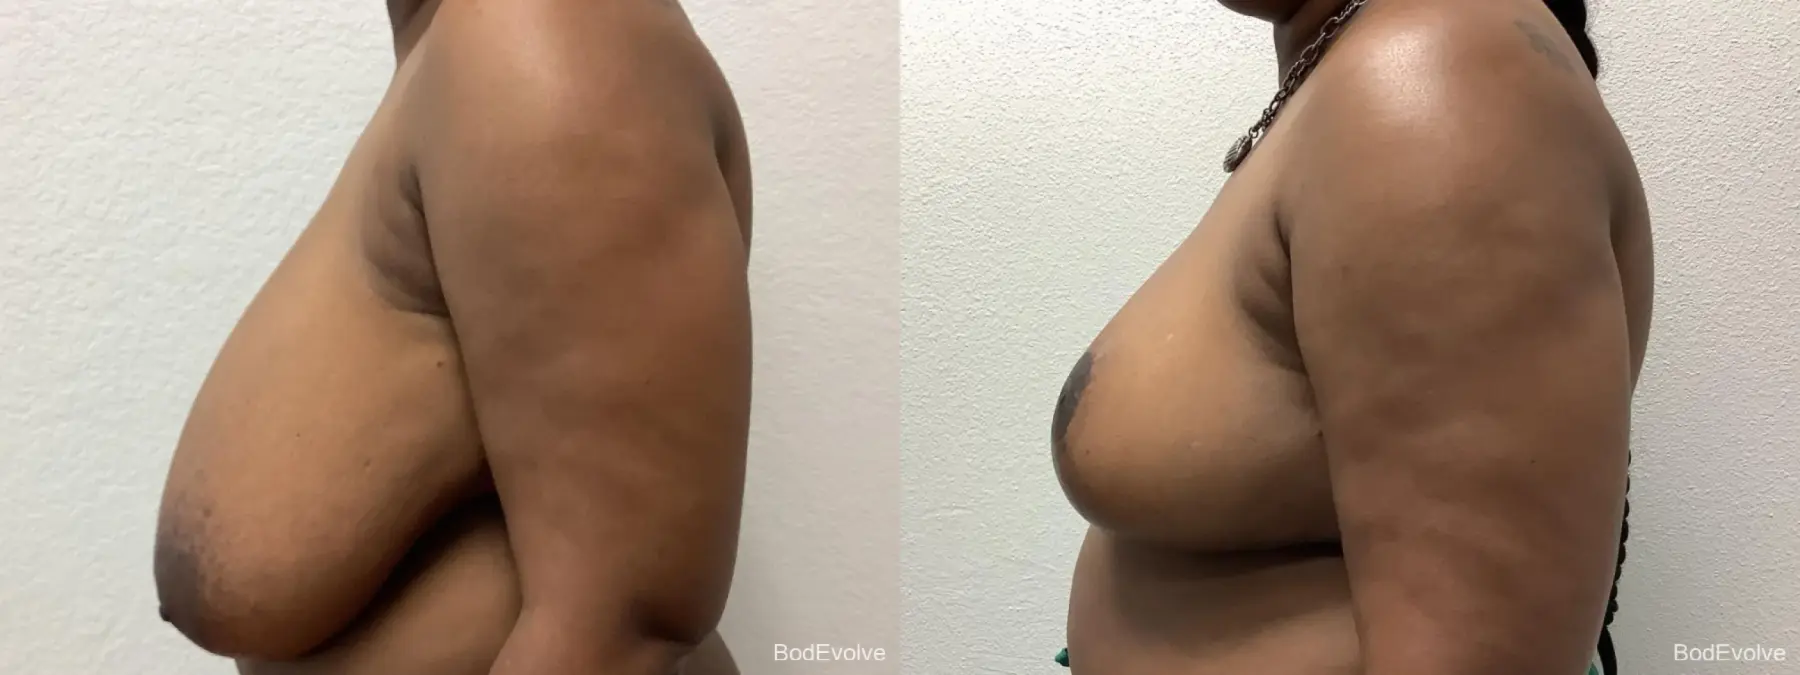 Breast Reduction: Patient 5 - Before and After 3